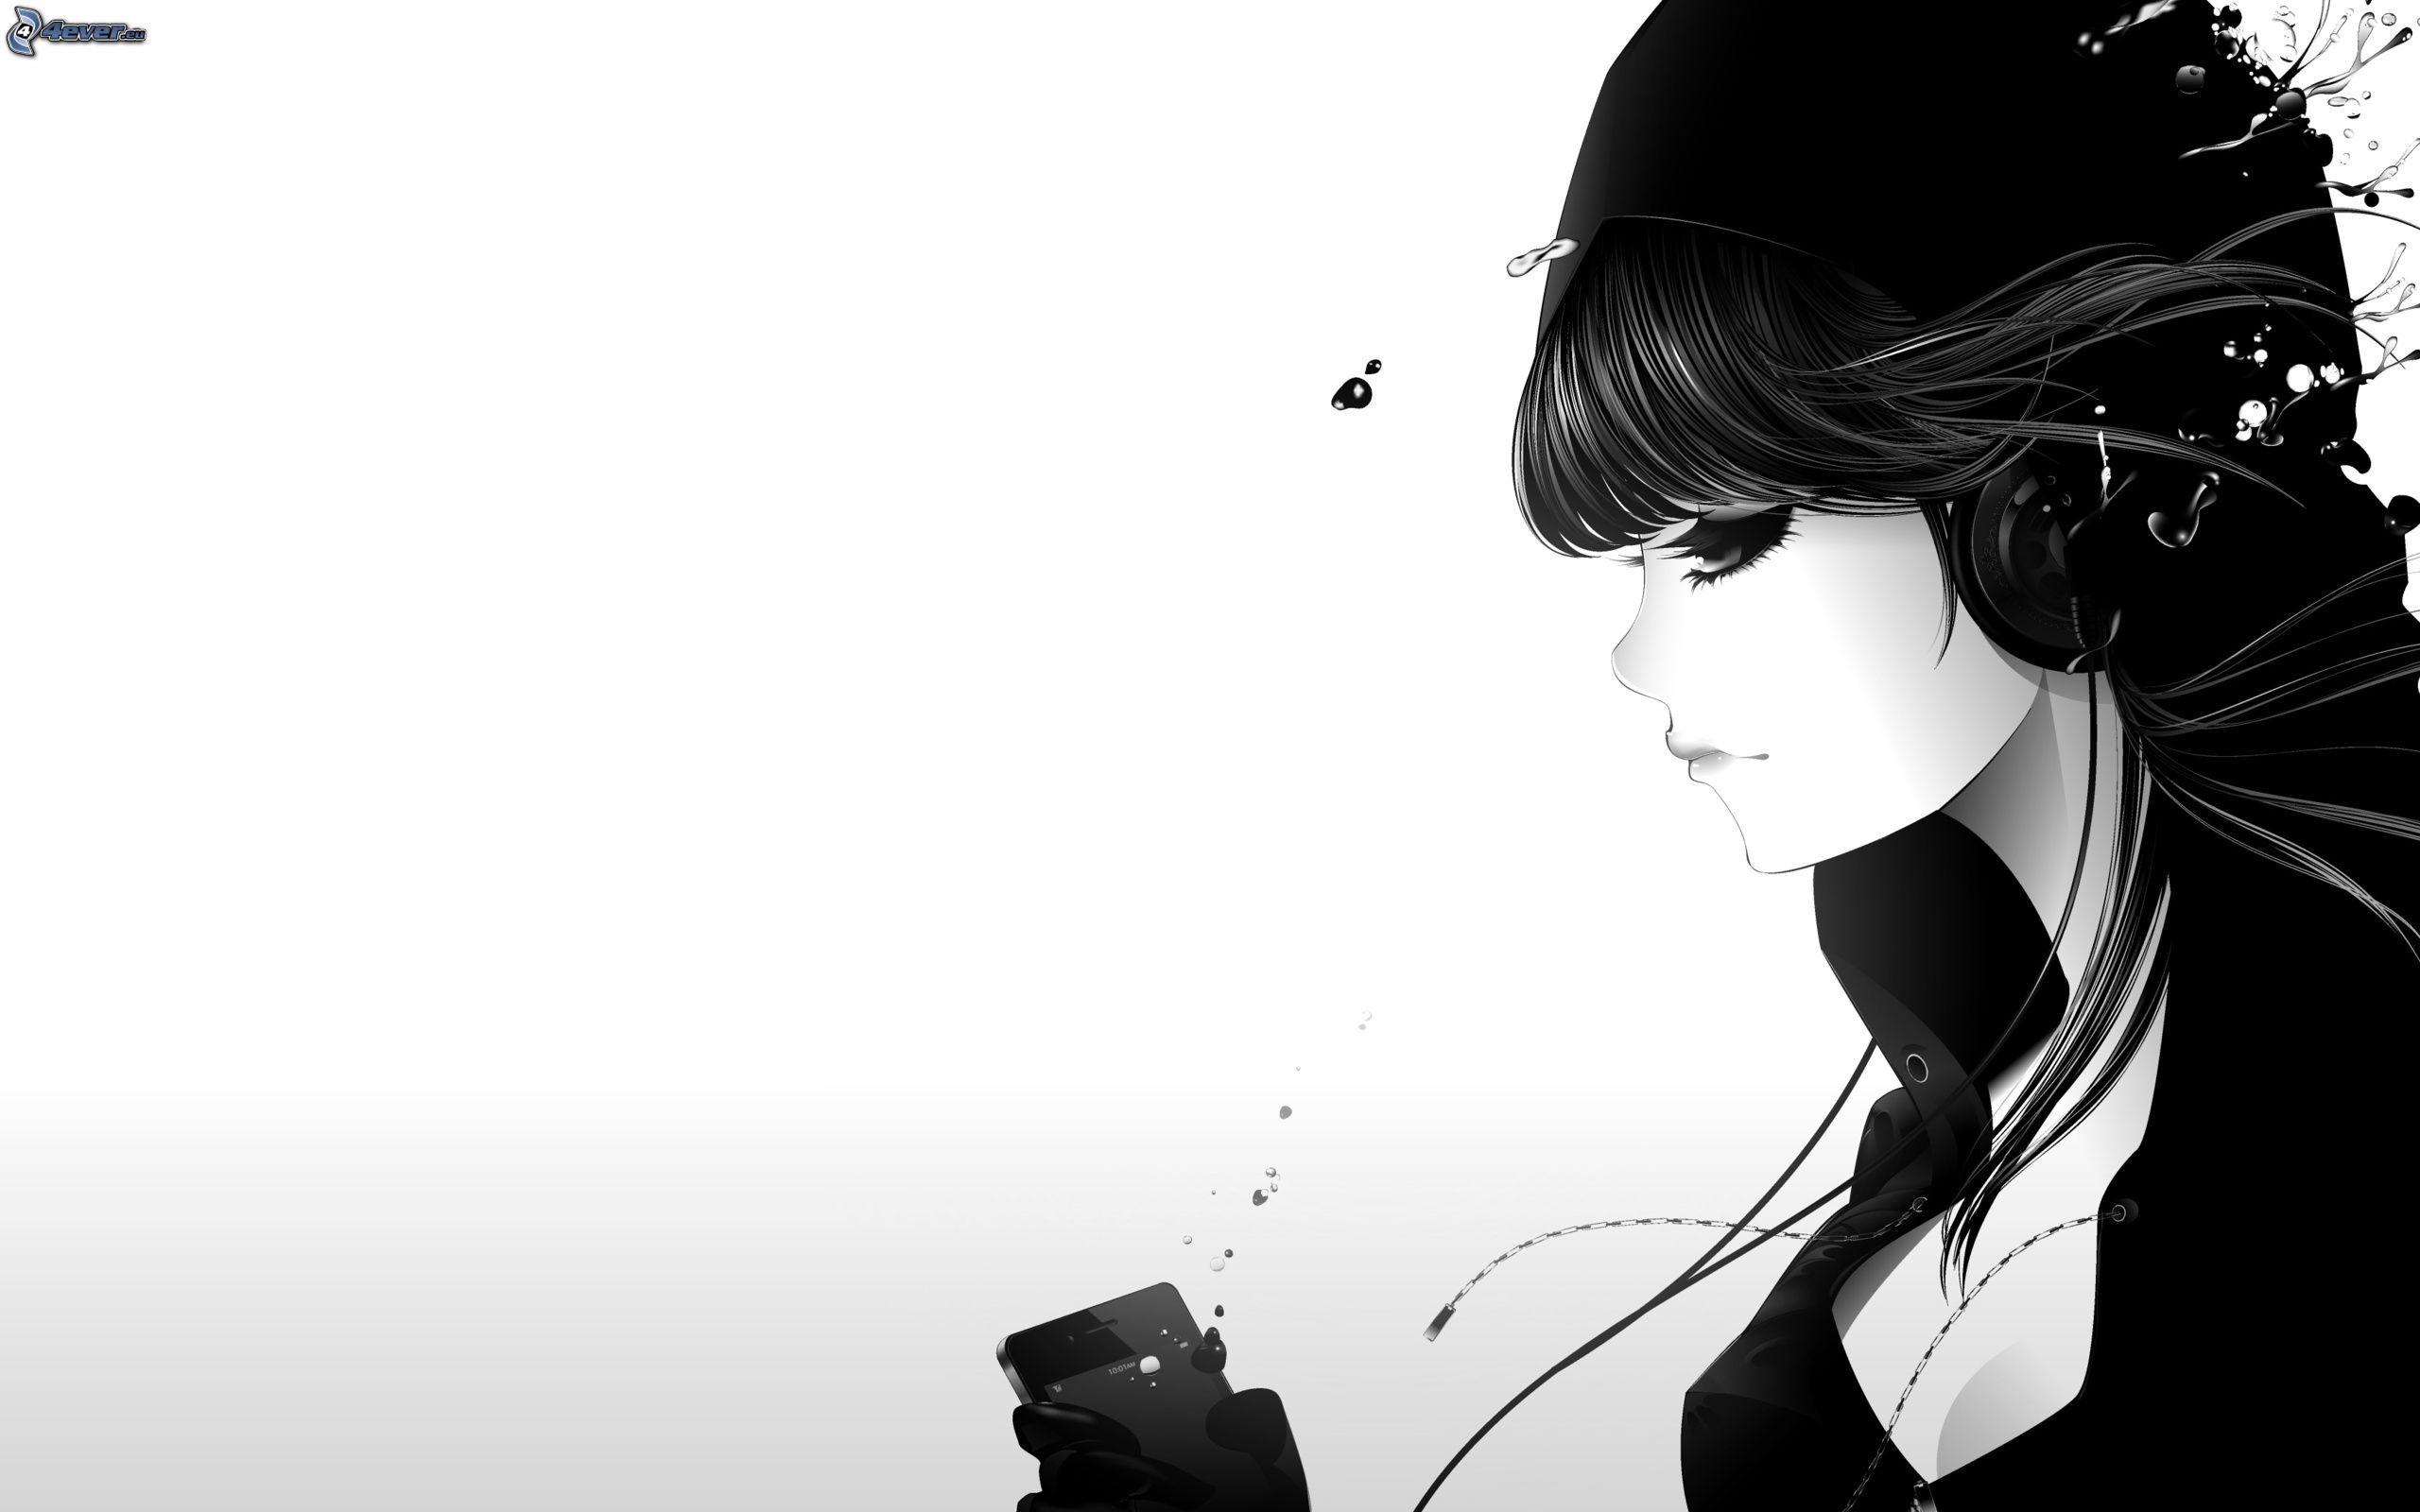 black and white anime girl with headphones